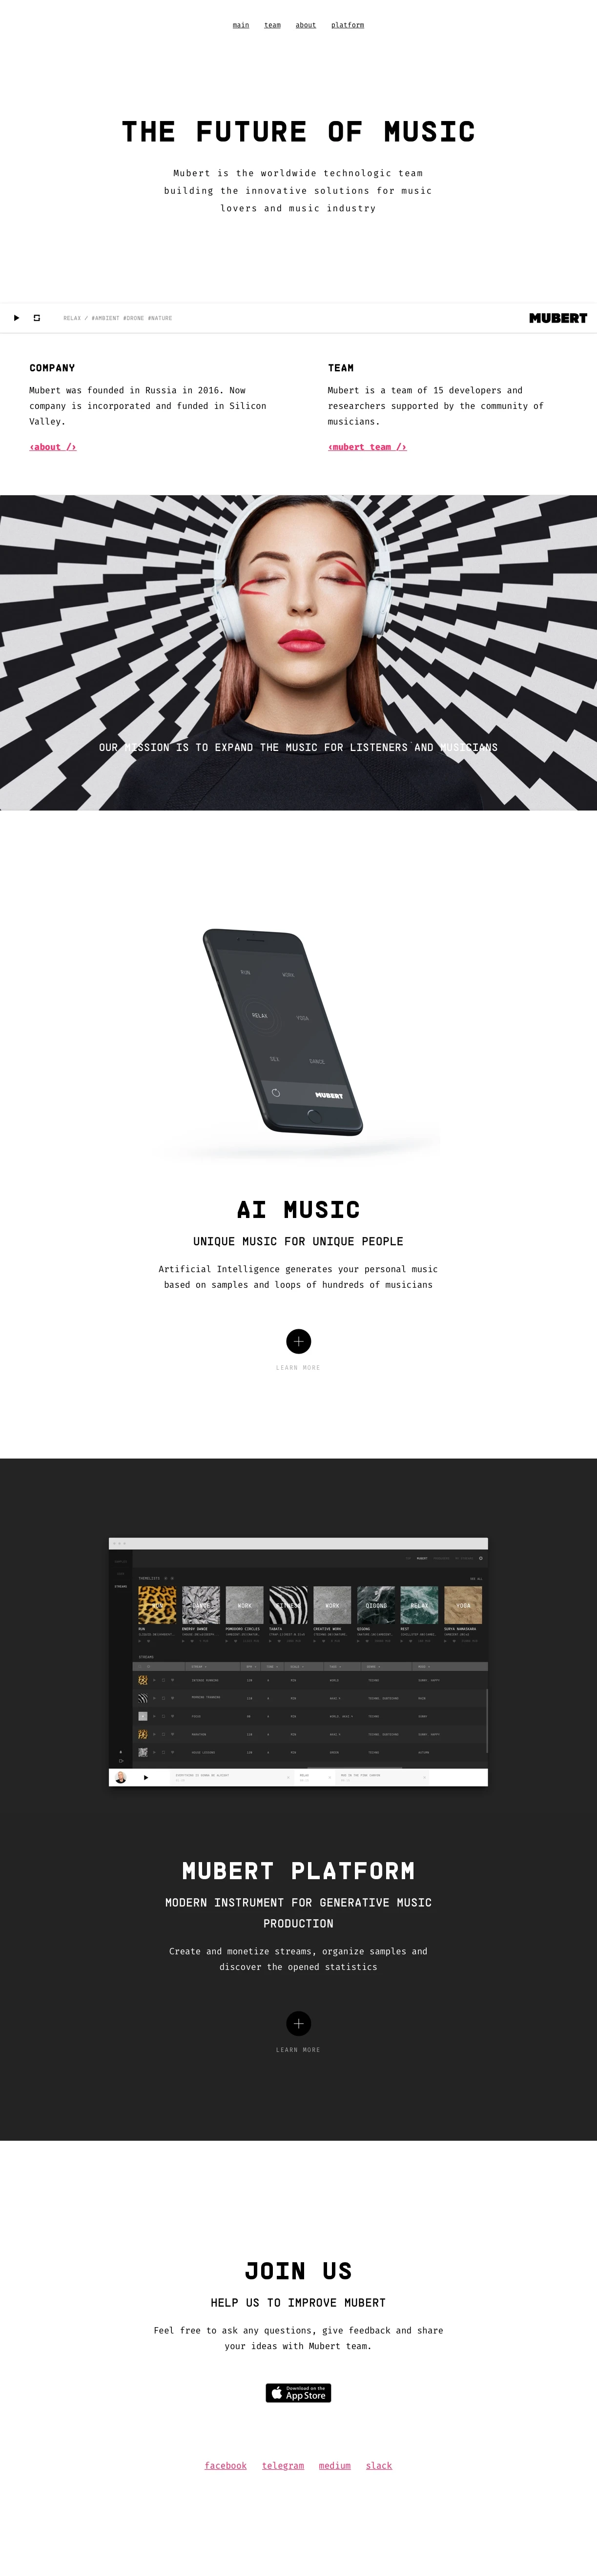 Mubert Landing Page Example: Mubert is the worldwide technologic team building the innovative solutions for music lovers and music industry